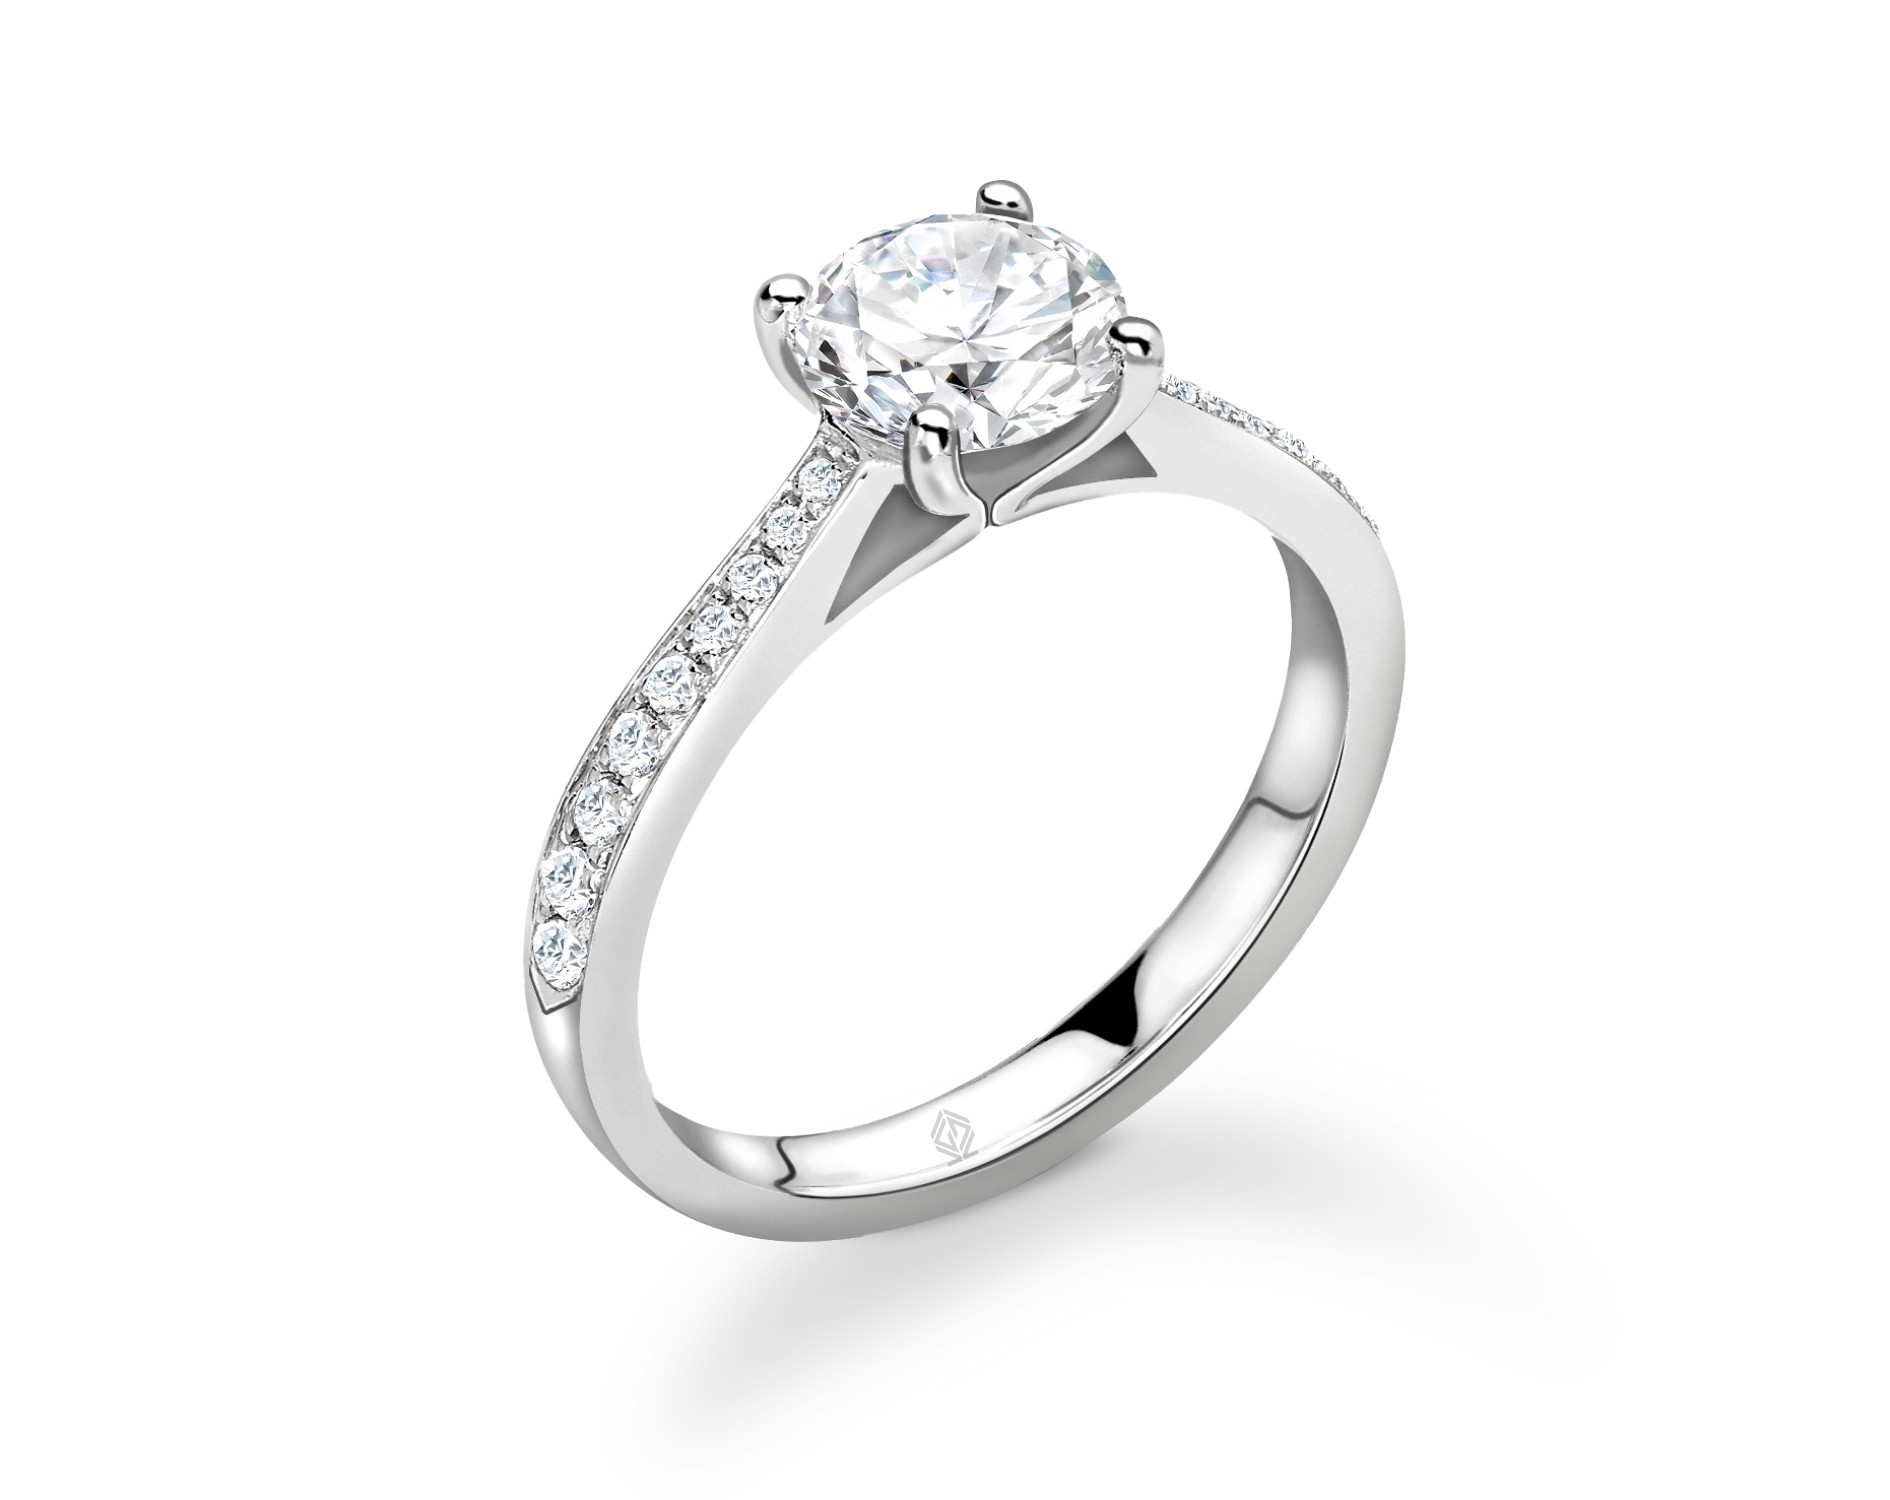 18K WHITE GOLD ROUND CUT 4 PRONGS DIAMOND ENGAGEMENT RING WITH SIDE STONES CHANNEL SET